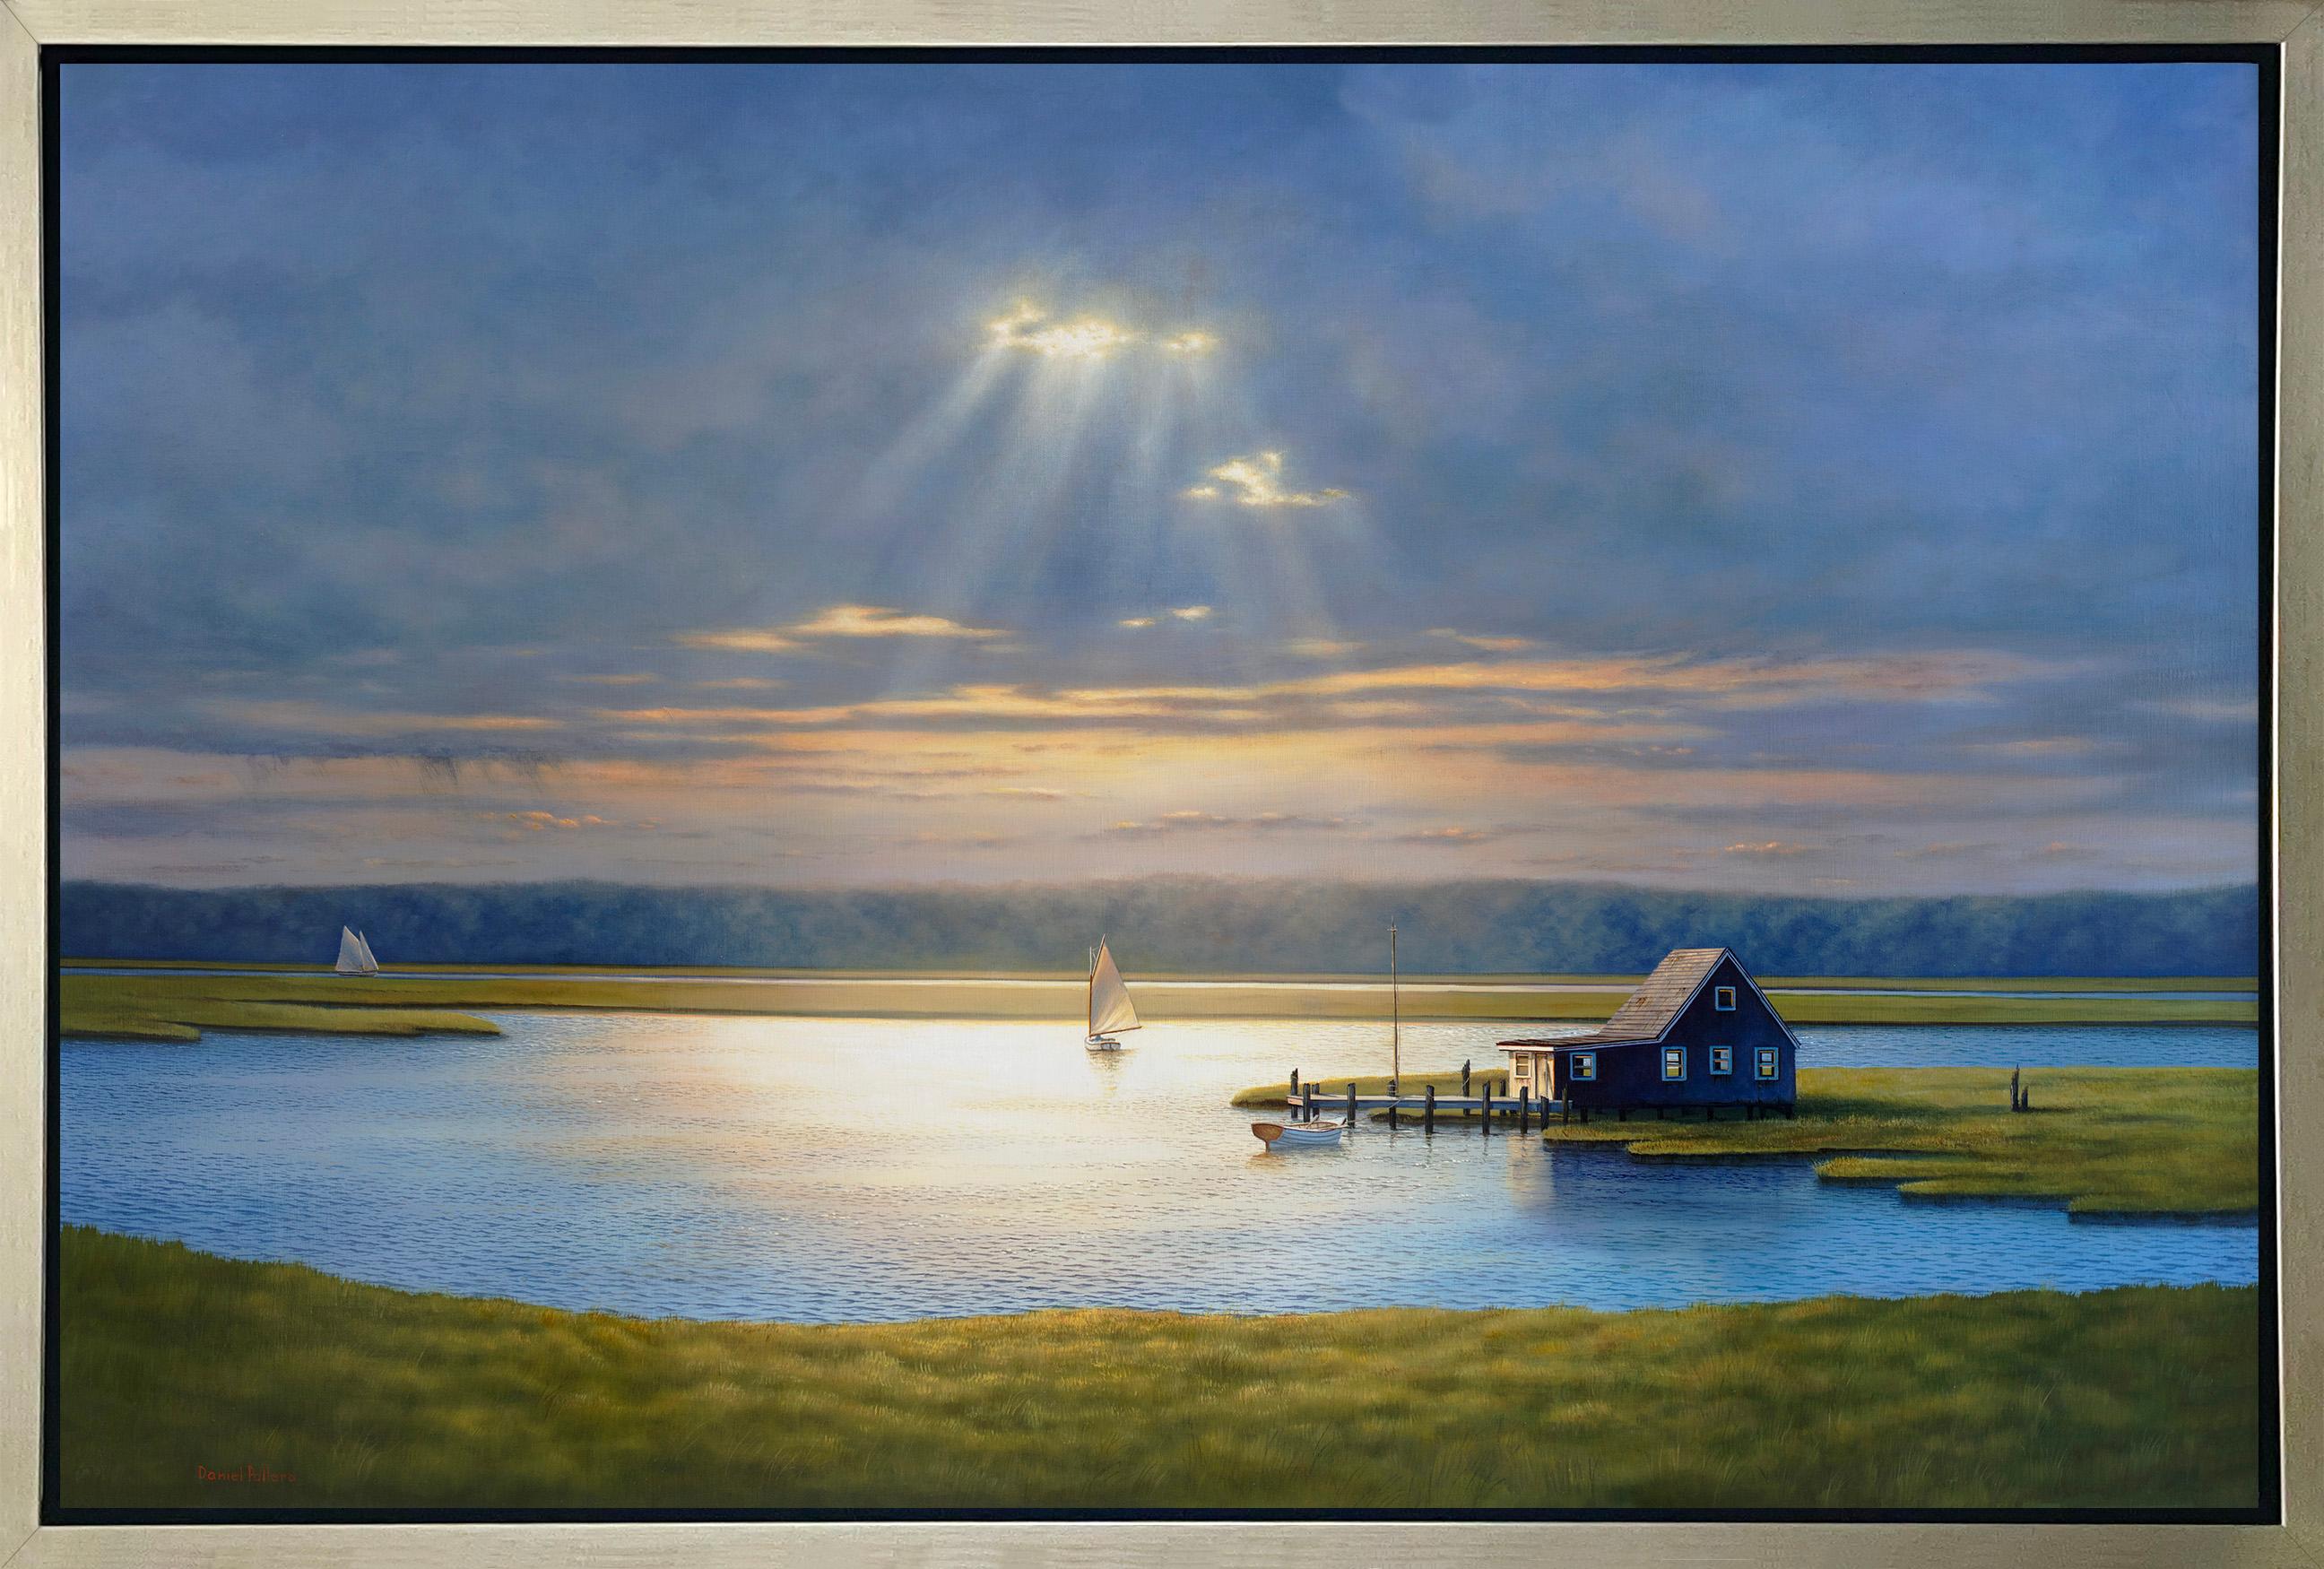 Daniel Pollera Landscape Print - "Into the Light, " Framed Limited Edition Giclee Print, 24" x 36"